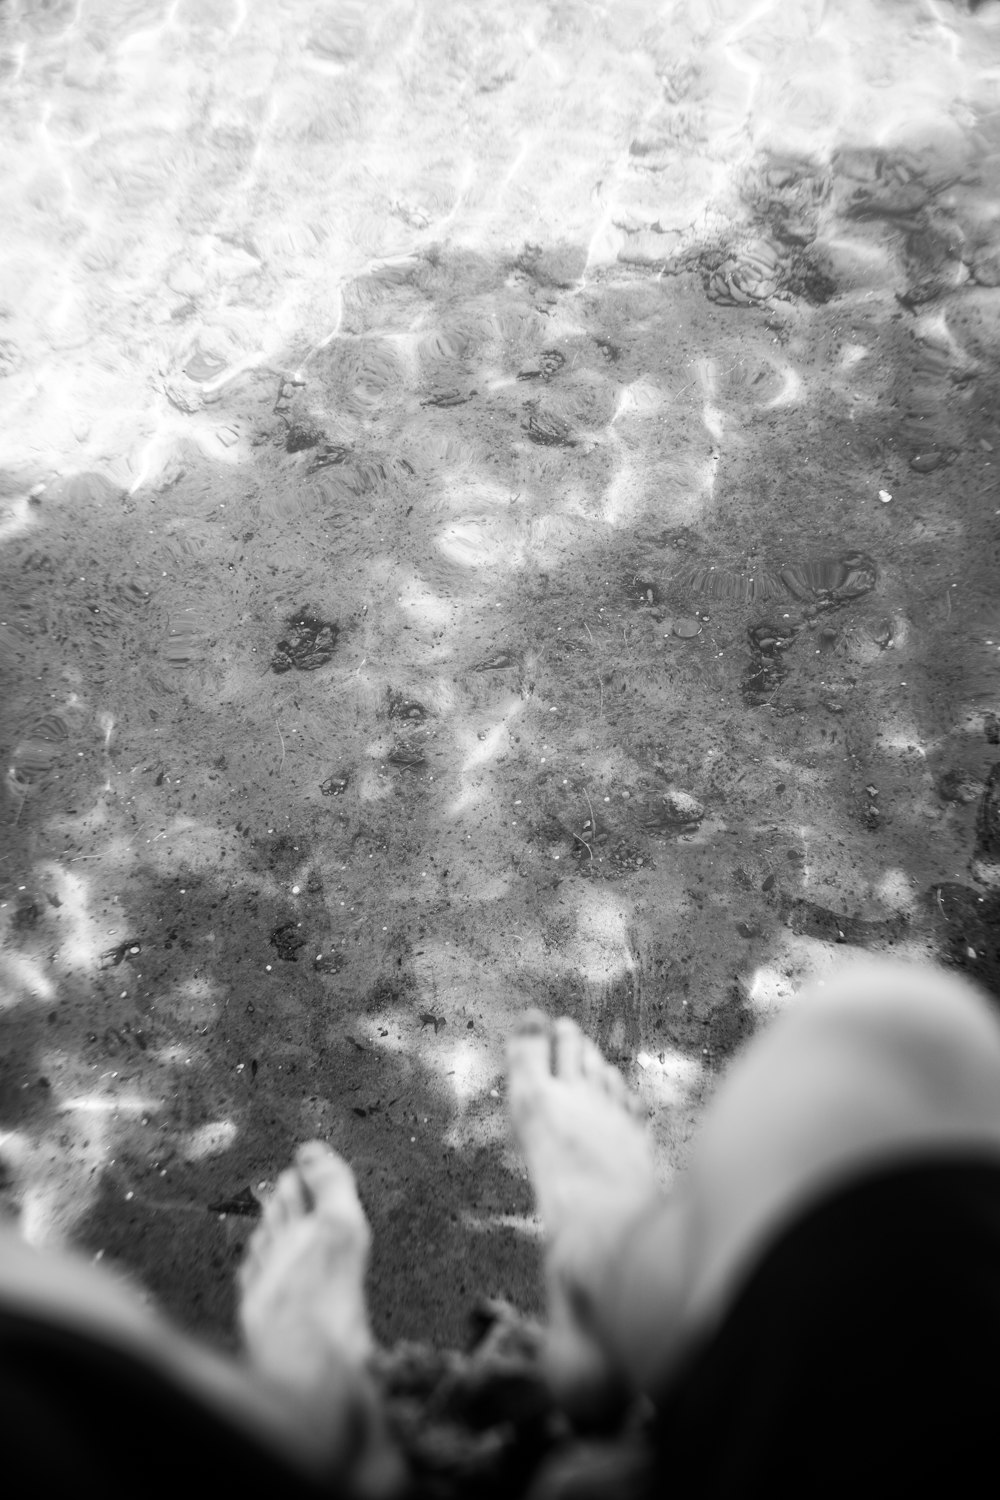 a black and white photo of a person's feet on the ground